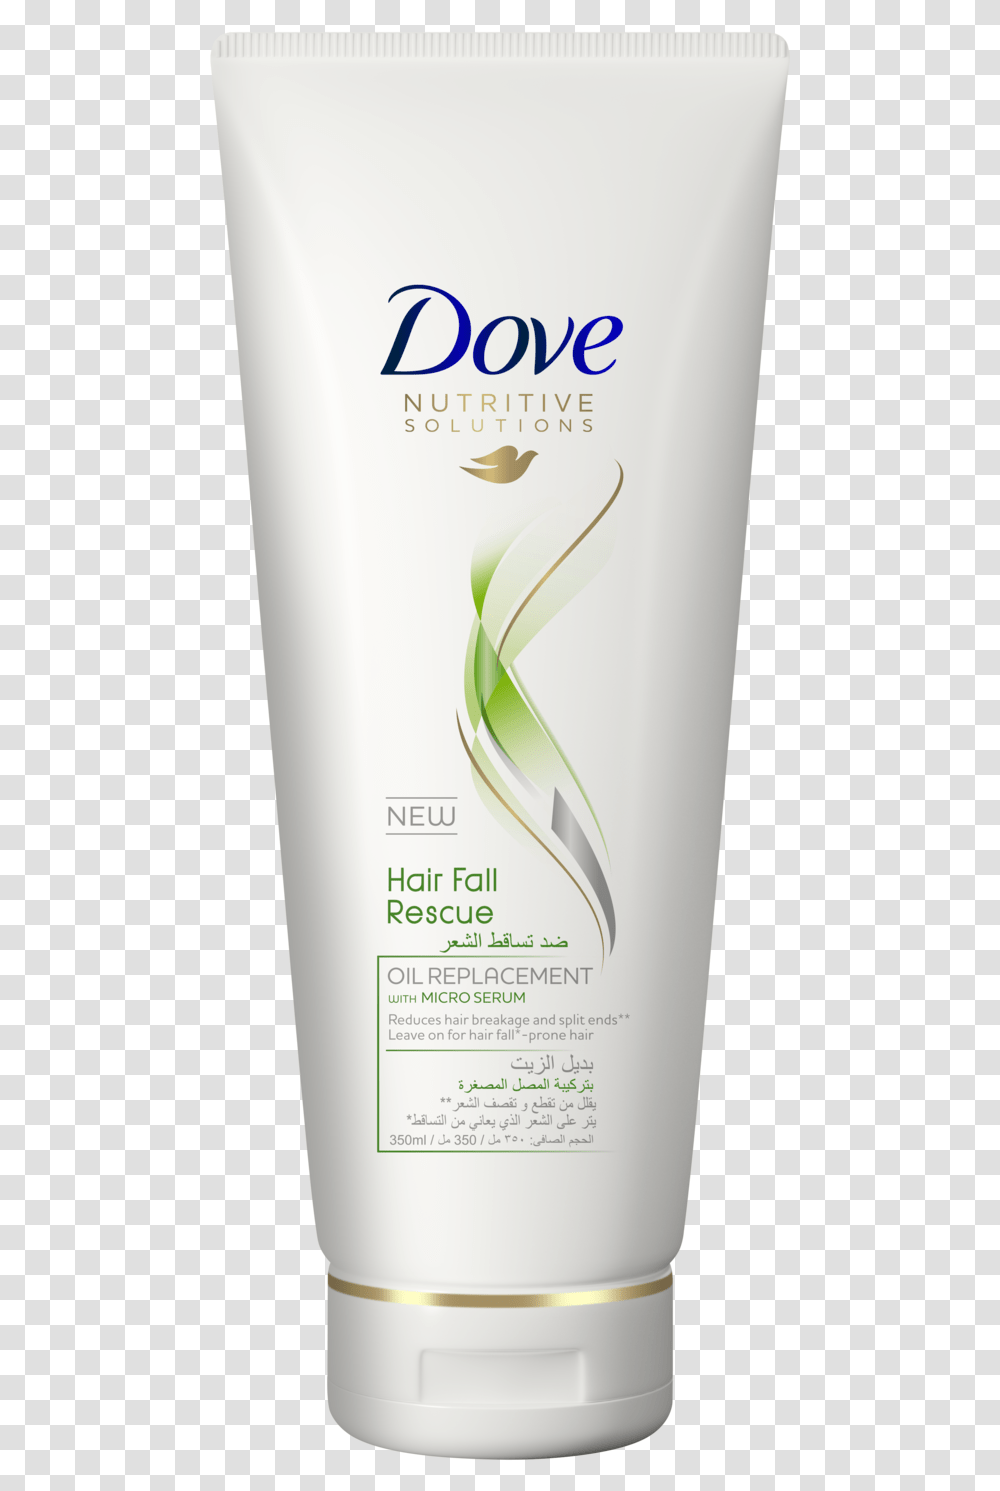 Dove Hair Fall Rescue Oil Replacement 350ml Propolis Cream Forever Living, Bottle, Shampoo, Lotion Transparent Png